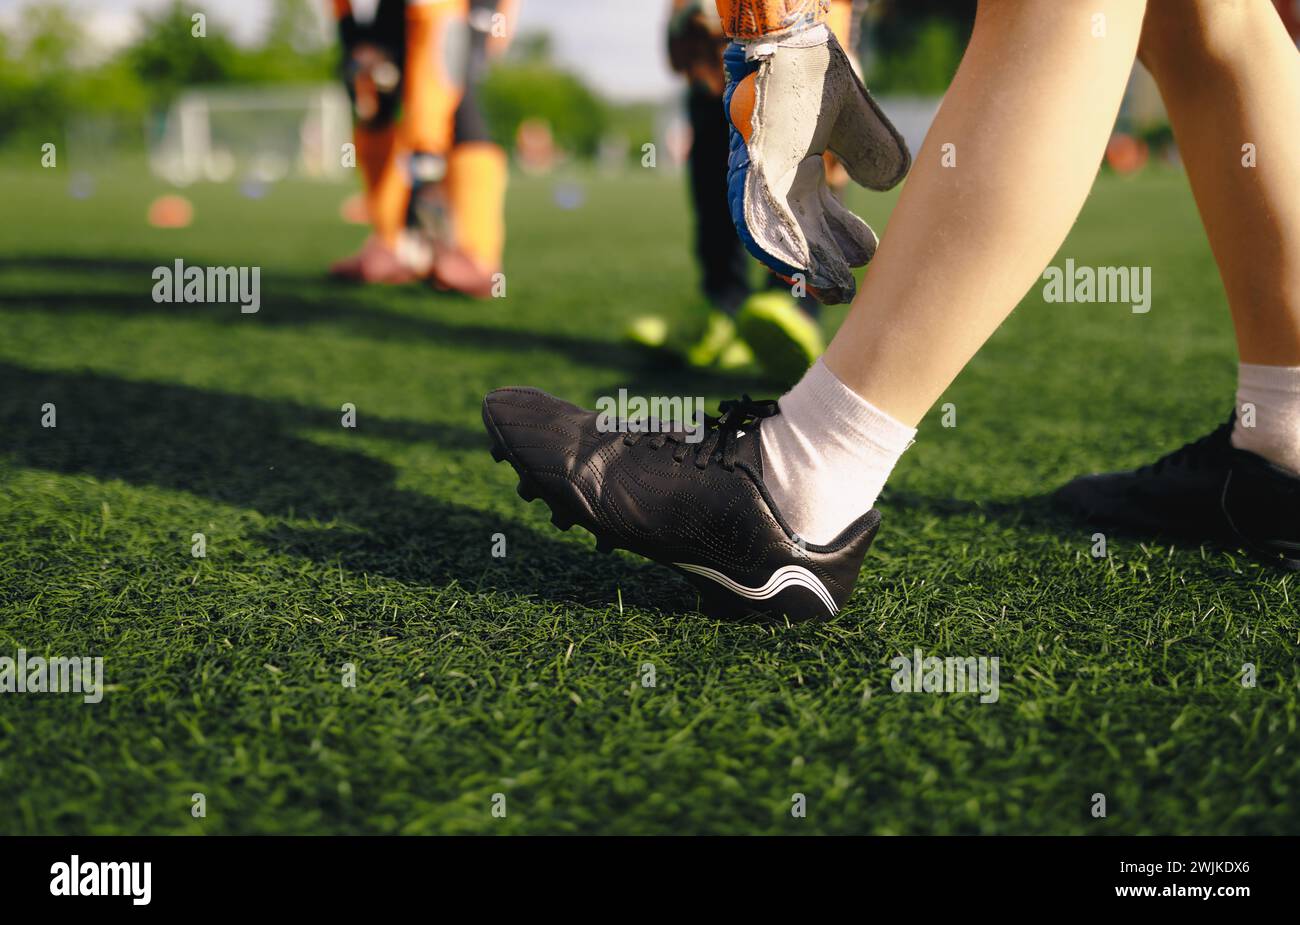 Soccer goalkeepers academy. Football goalie stretching legs at training session. Boy in soccer cleats and gloves in practice session Stock Photo